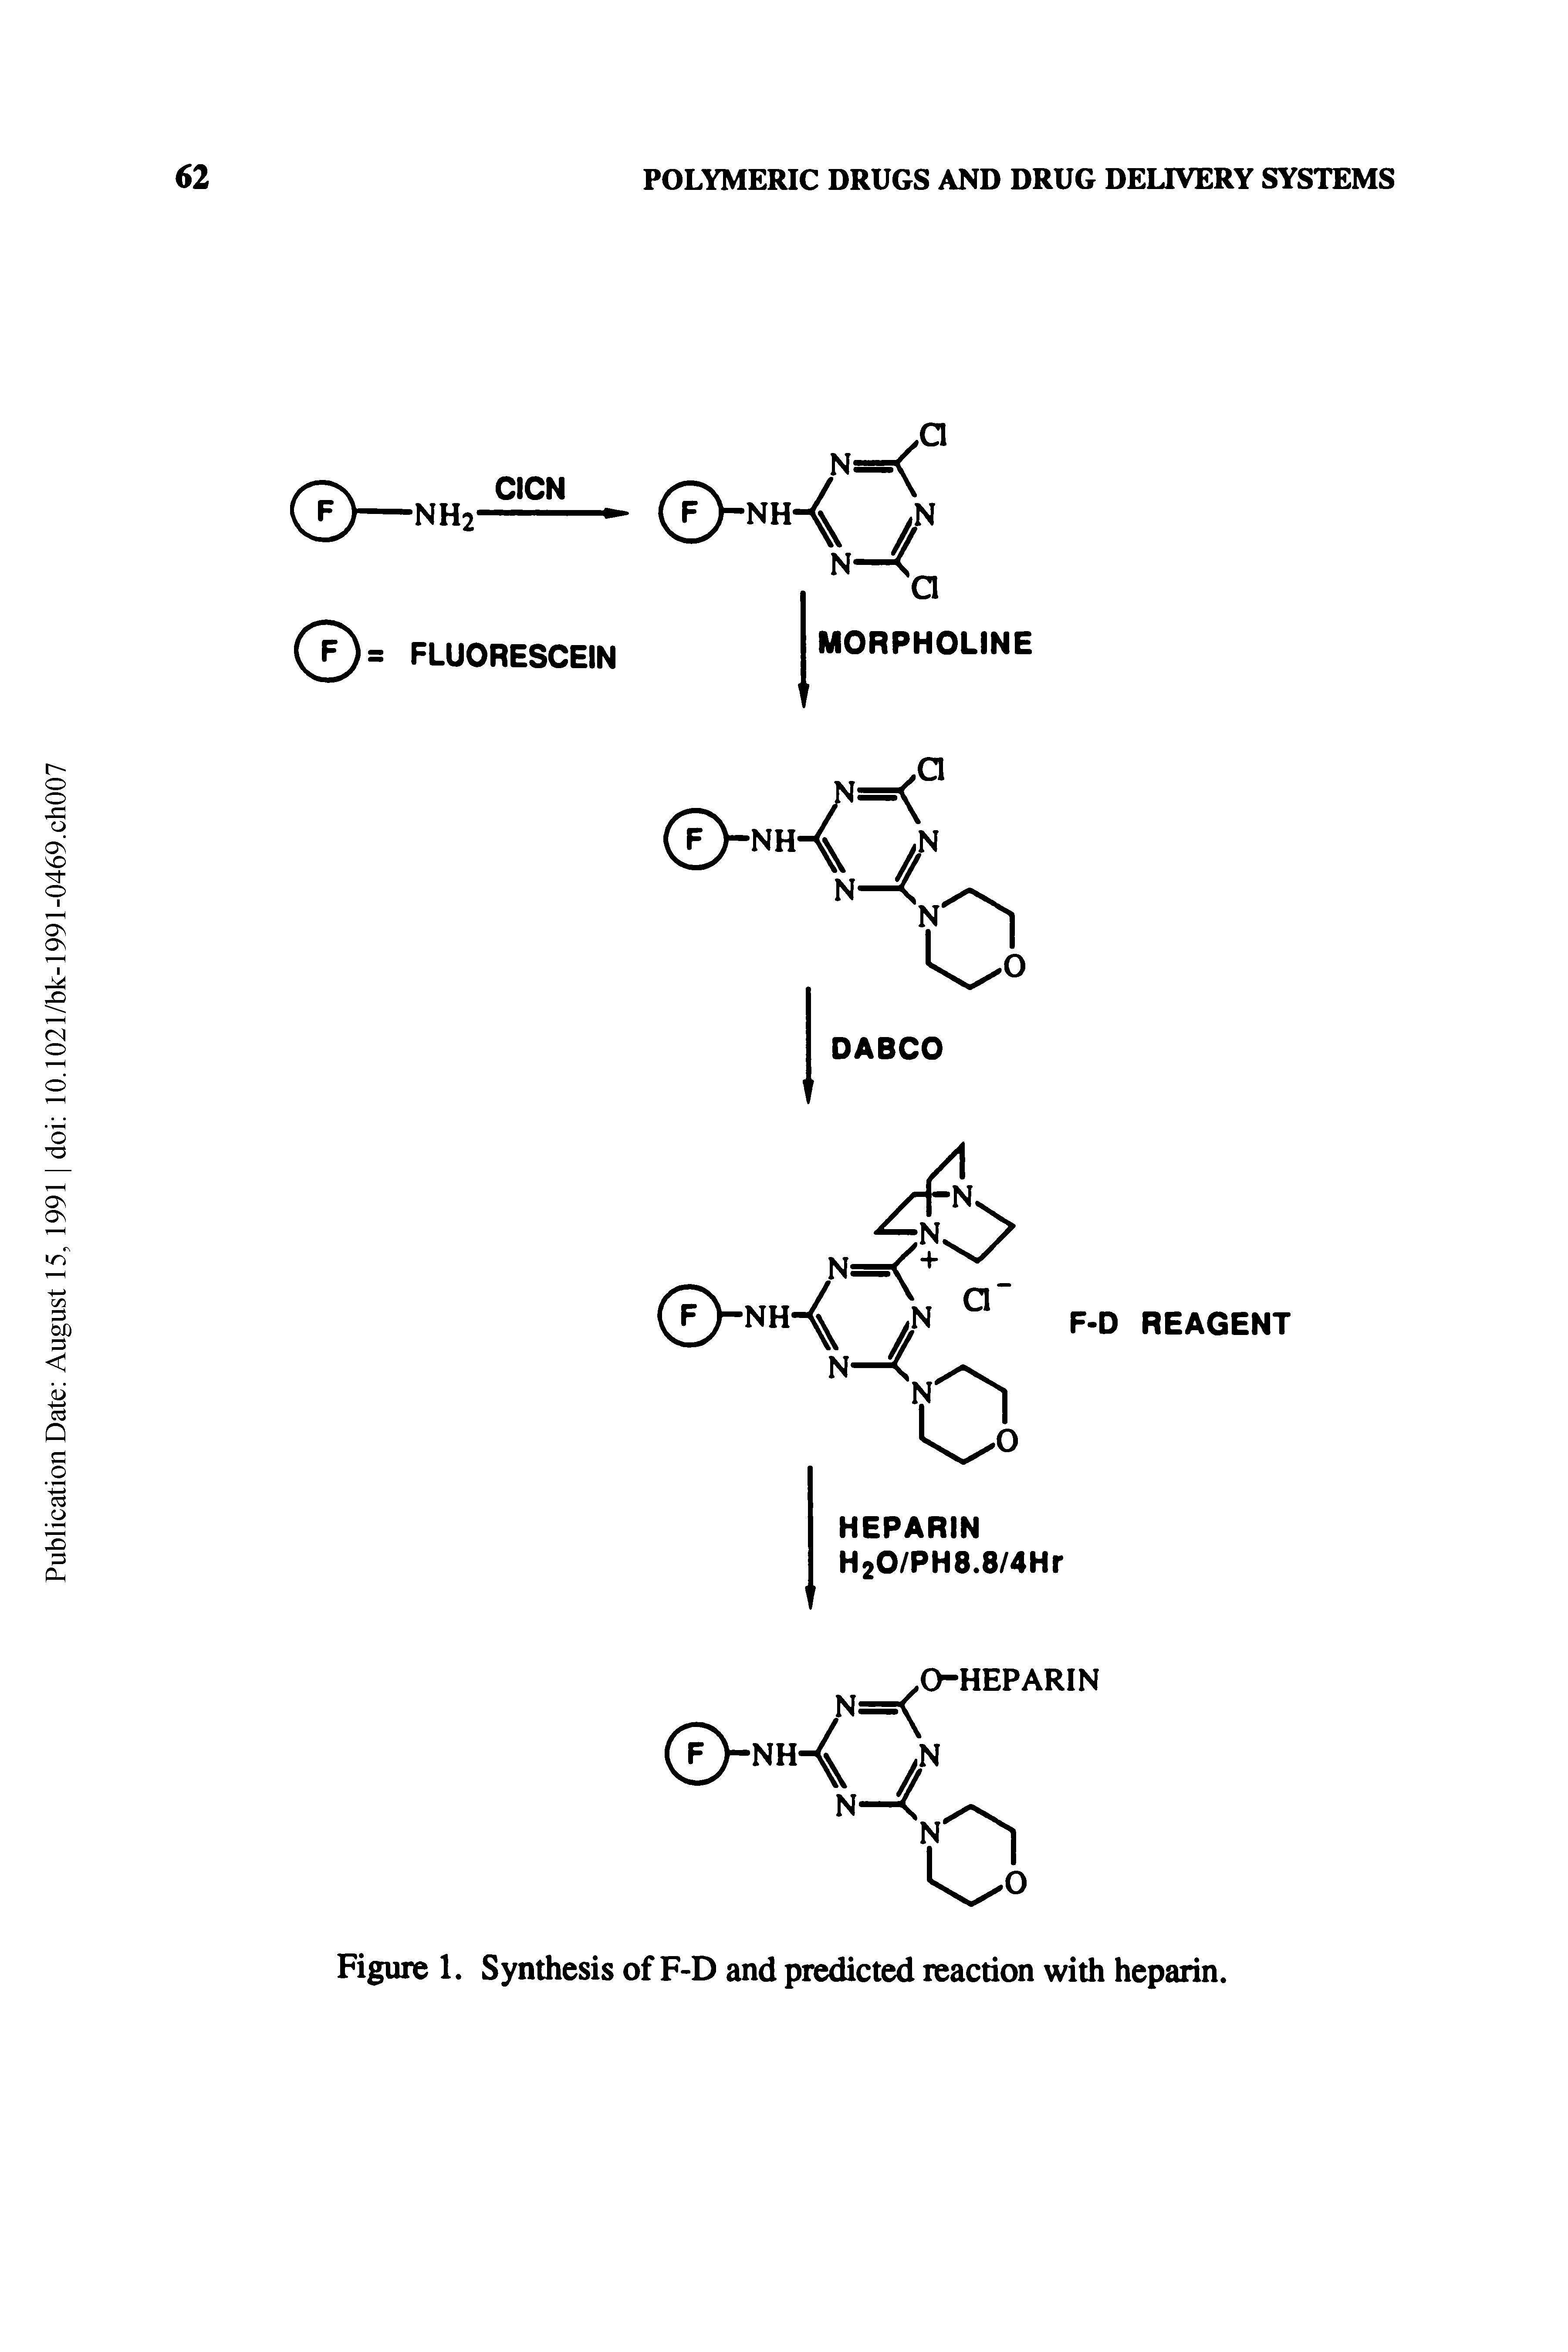 Figure 1. Synthesis of F-D and predicted reaction with heparin.